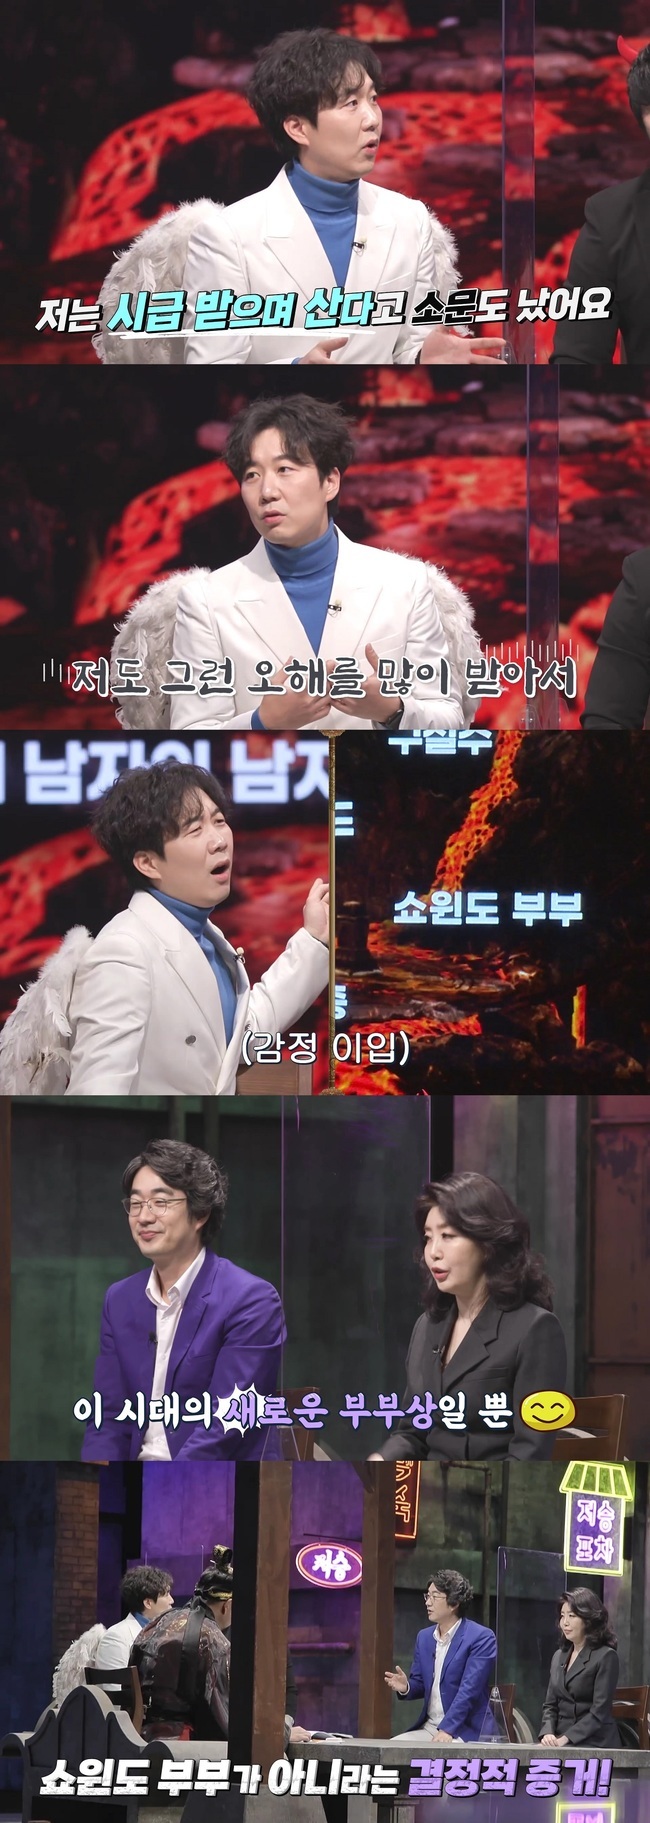 The broadcaster Do Kyoung-wan said, I was rumored to live in Gu Long for my wife Jang Yun-jeong.MBNs God and the Blessed Edition, which will be broadcast on March 25, will be released by the first couple who have a chance to stop the ring, and a hot life-full talk will be released.The Hong Hye-geol and Yeo Esther, who are known as the universal containers of medicine, have explored the truth workshop of the show window couple, along with an extraordinary keyword such as Showwindo couple, My mans man, Diamond spoon, Menopause war, depression,  He foreshadowed a candid talk with a torque.Among them, Do Kyoung-wan focused his attention on the appearance of Why am I annoyed with the keyword of the show window couple?I also received too many misunderstandings about the show window couple, he said. Even my wife Jang Yun-jeong was told that she was living with Gu Long and was paid an hourly rate.Yeo Esther explained that the epicenter of all these rumors is the mouth of Yeo Esther about the show window couple.I told him on the air that if he behaves strangely, he will divorce, but he is not really a show window couple.However, from 3 to 4 years ago, each bed, each room a year or two ago, and a year ago, I live in my own house.Im in Seoul and my husband is in Jeju Island.When Kim Gura, the king of the Great King, said, That is the procedure of the Baro divorce, Yeo Esther refuted, It is only a new couple of this age, not at all. Hong Hye-geol also said, The face is already known, so the show window is impossible.In fact, there were many appearances of entertainment with couples, but observation can not be done if the couple is not good.You cant fool a lot of people for a long time, he said.They also said, Our couple, who are separated from Jeju and Seoul, may seem strange, but they are considered to be friendship indifference.It is a story when there is no affection, and it is different from the soul.We are not hot, but we have affection, and we live in our lives with confidence based on our 28-year marriage. Yeo Esther said, I am a parent-in-law next to my husbands Baro, and I am with my two sons in Seoul.